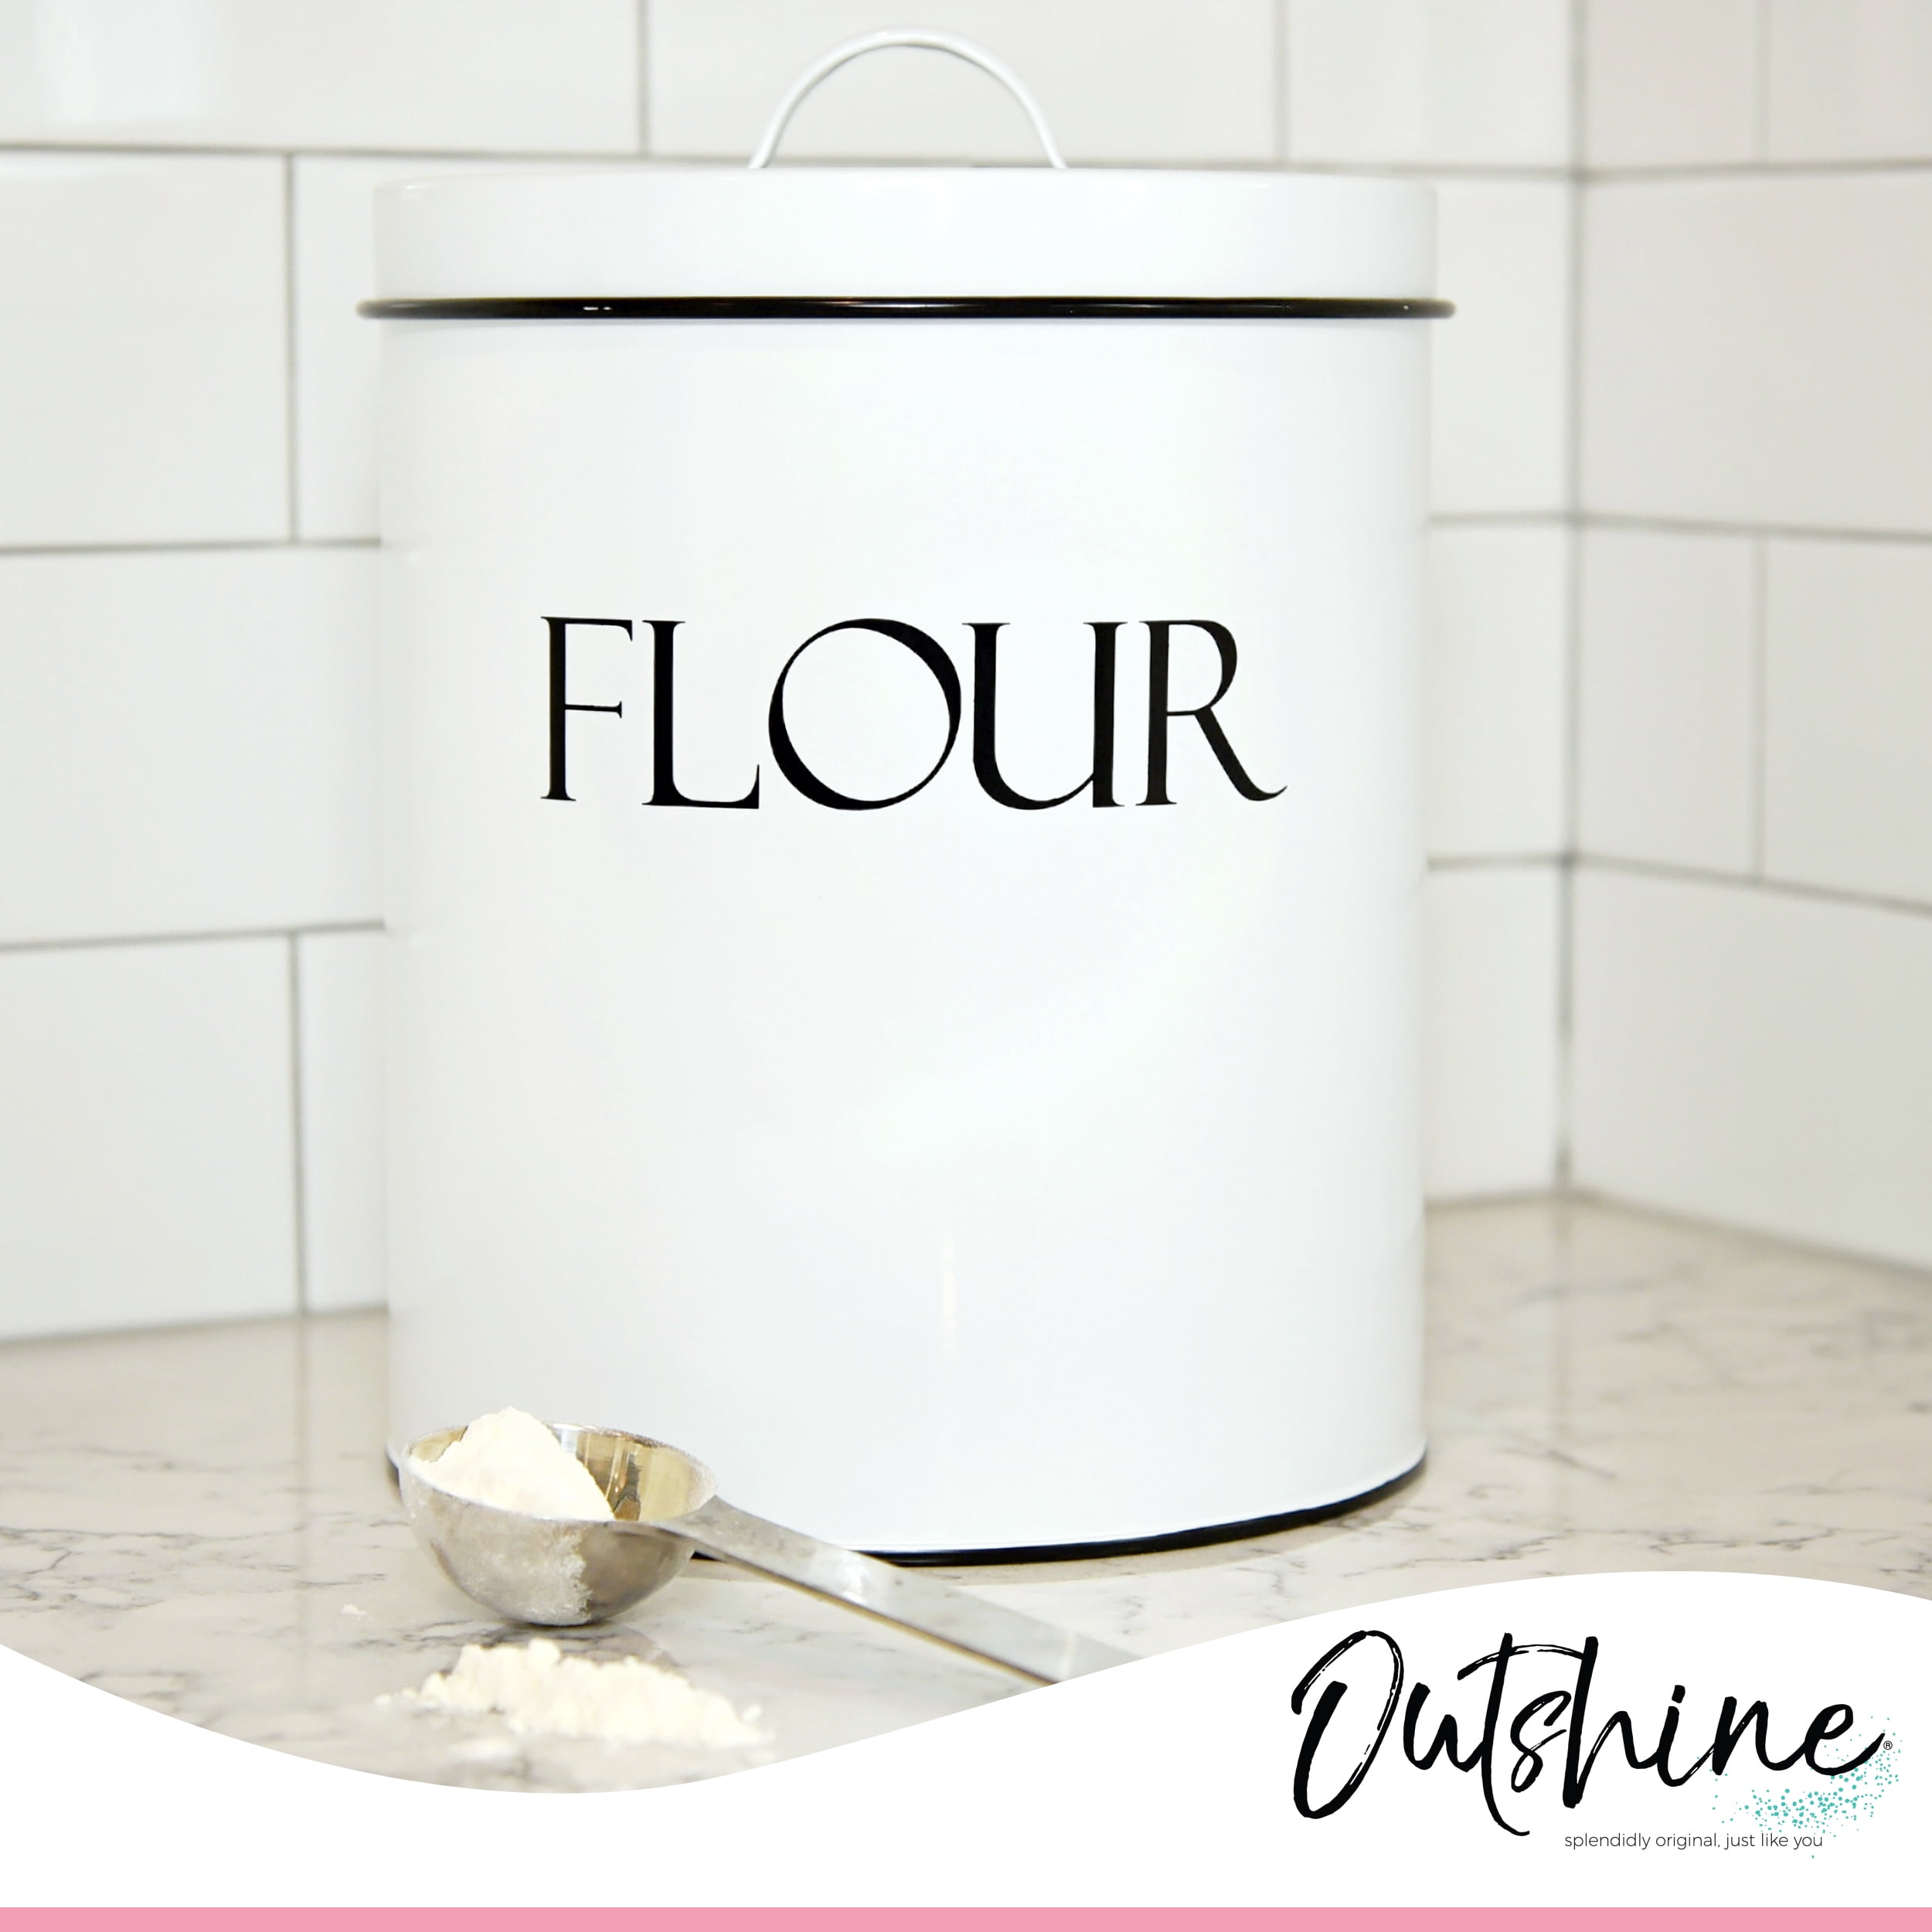 Flour Food Storage Canister White - Threshold 1 ct